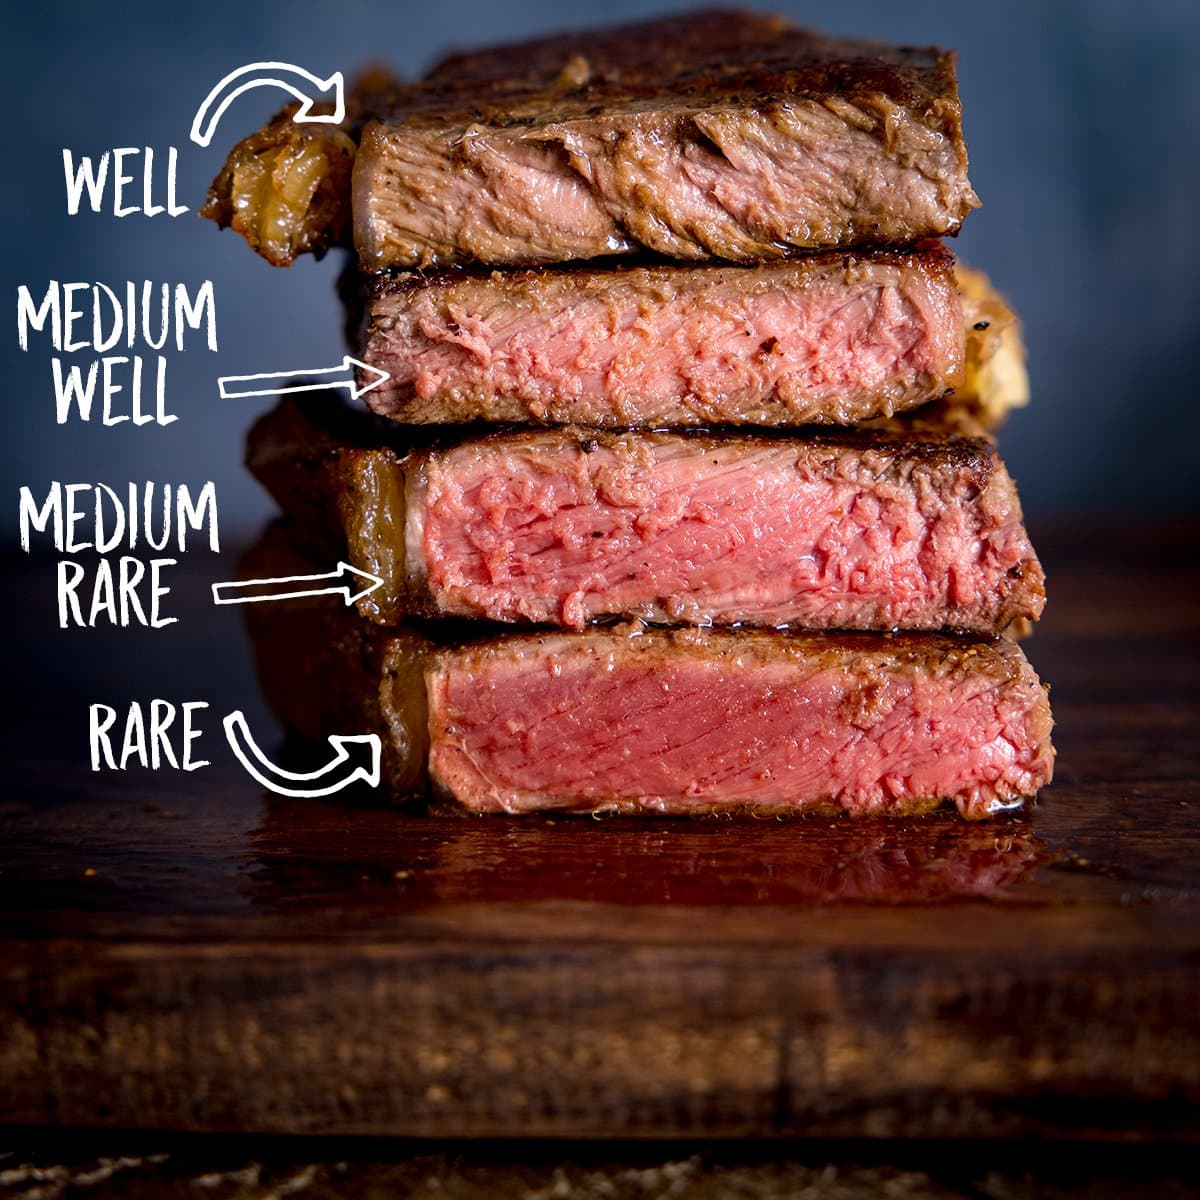 https://www.kitchensanctuary.com/wp-content/uploads/2021/09/How-to-cook-the-perfect-steak-square-FS.jpg